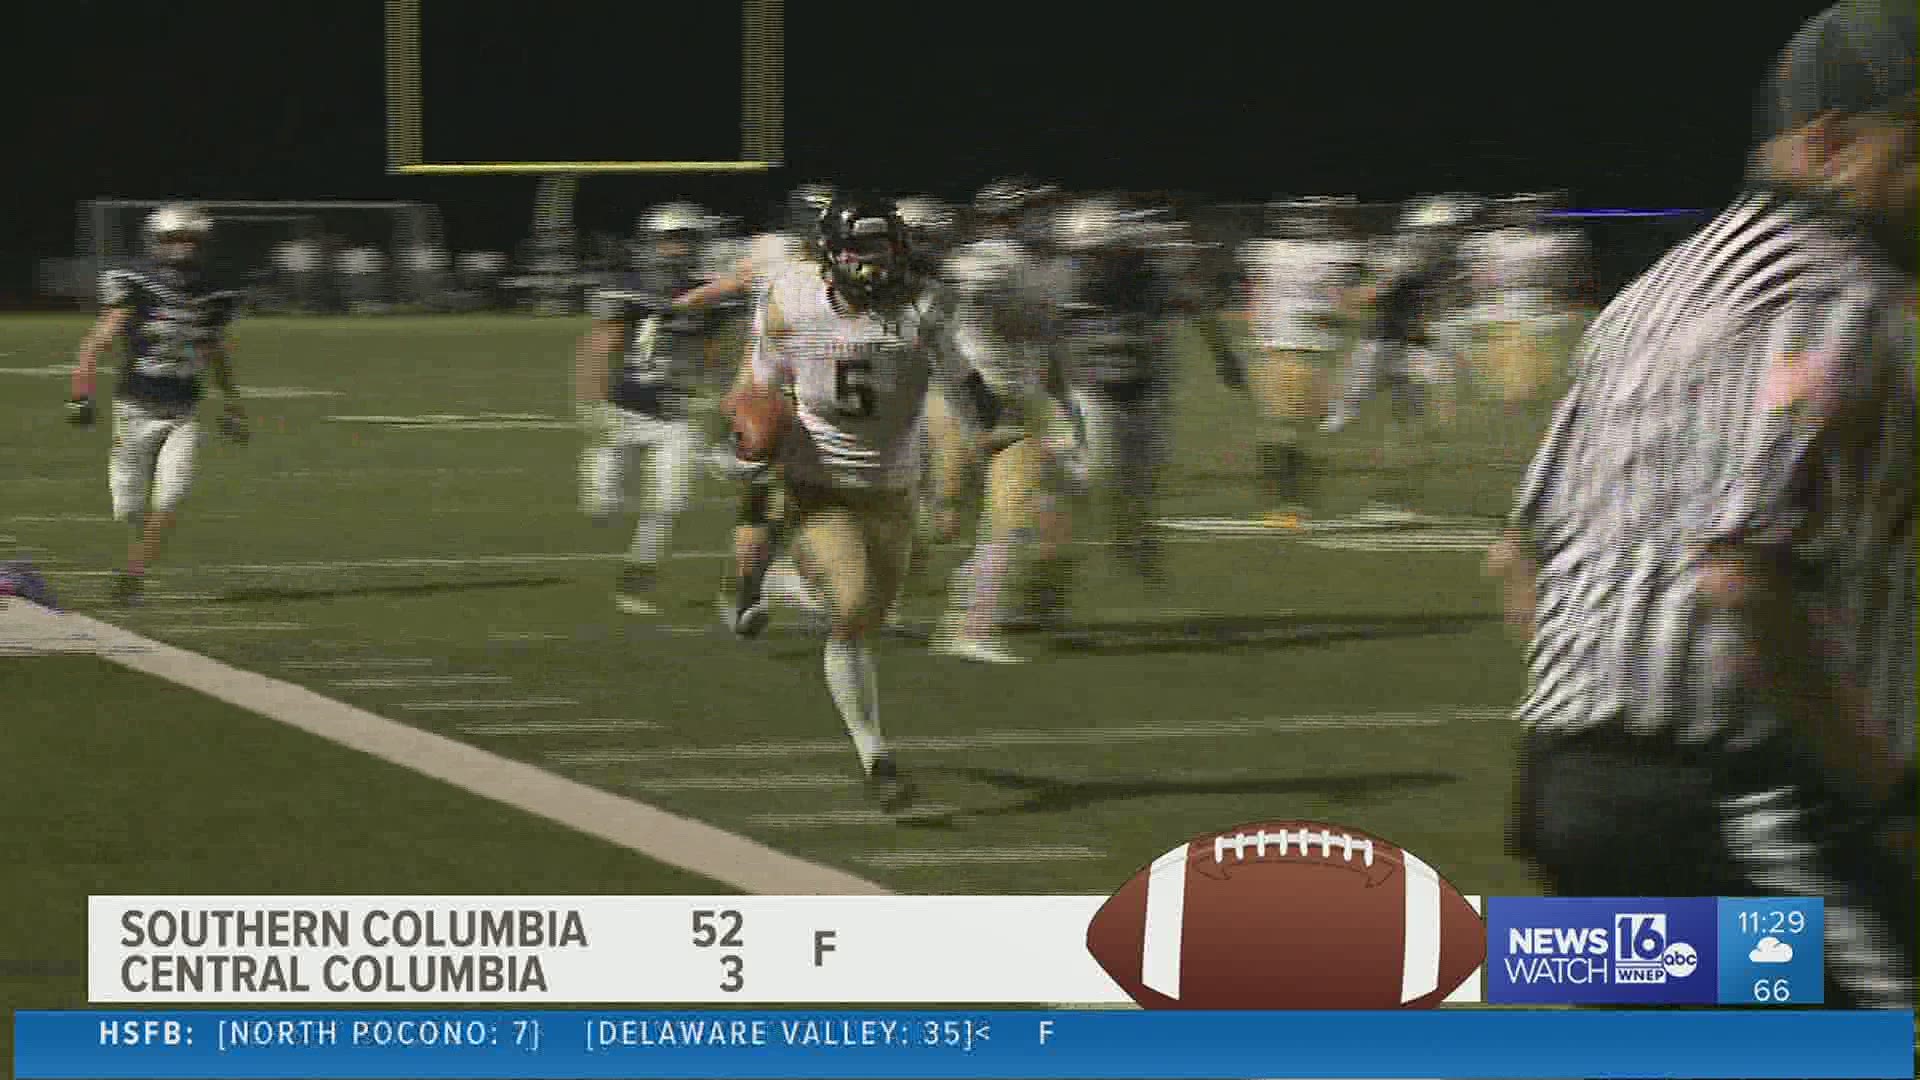 Southern Columbia defeats Central Columbia 52-3